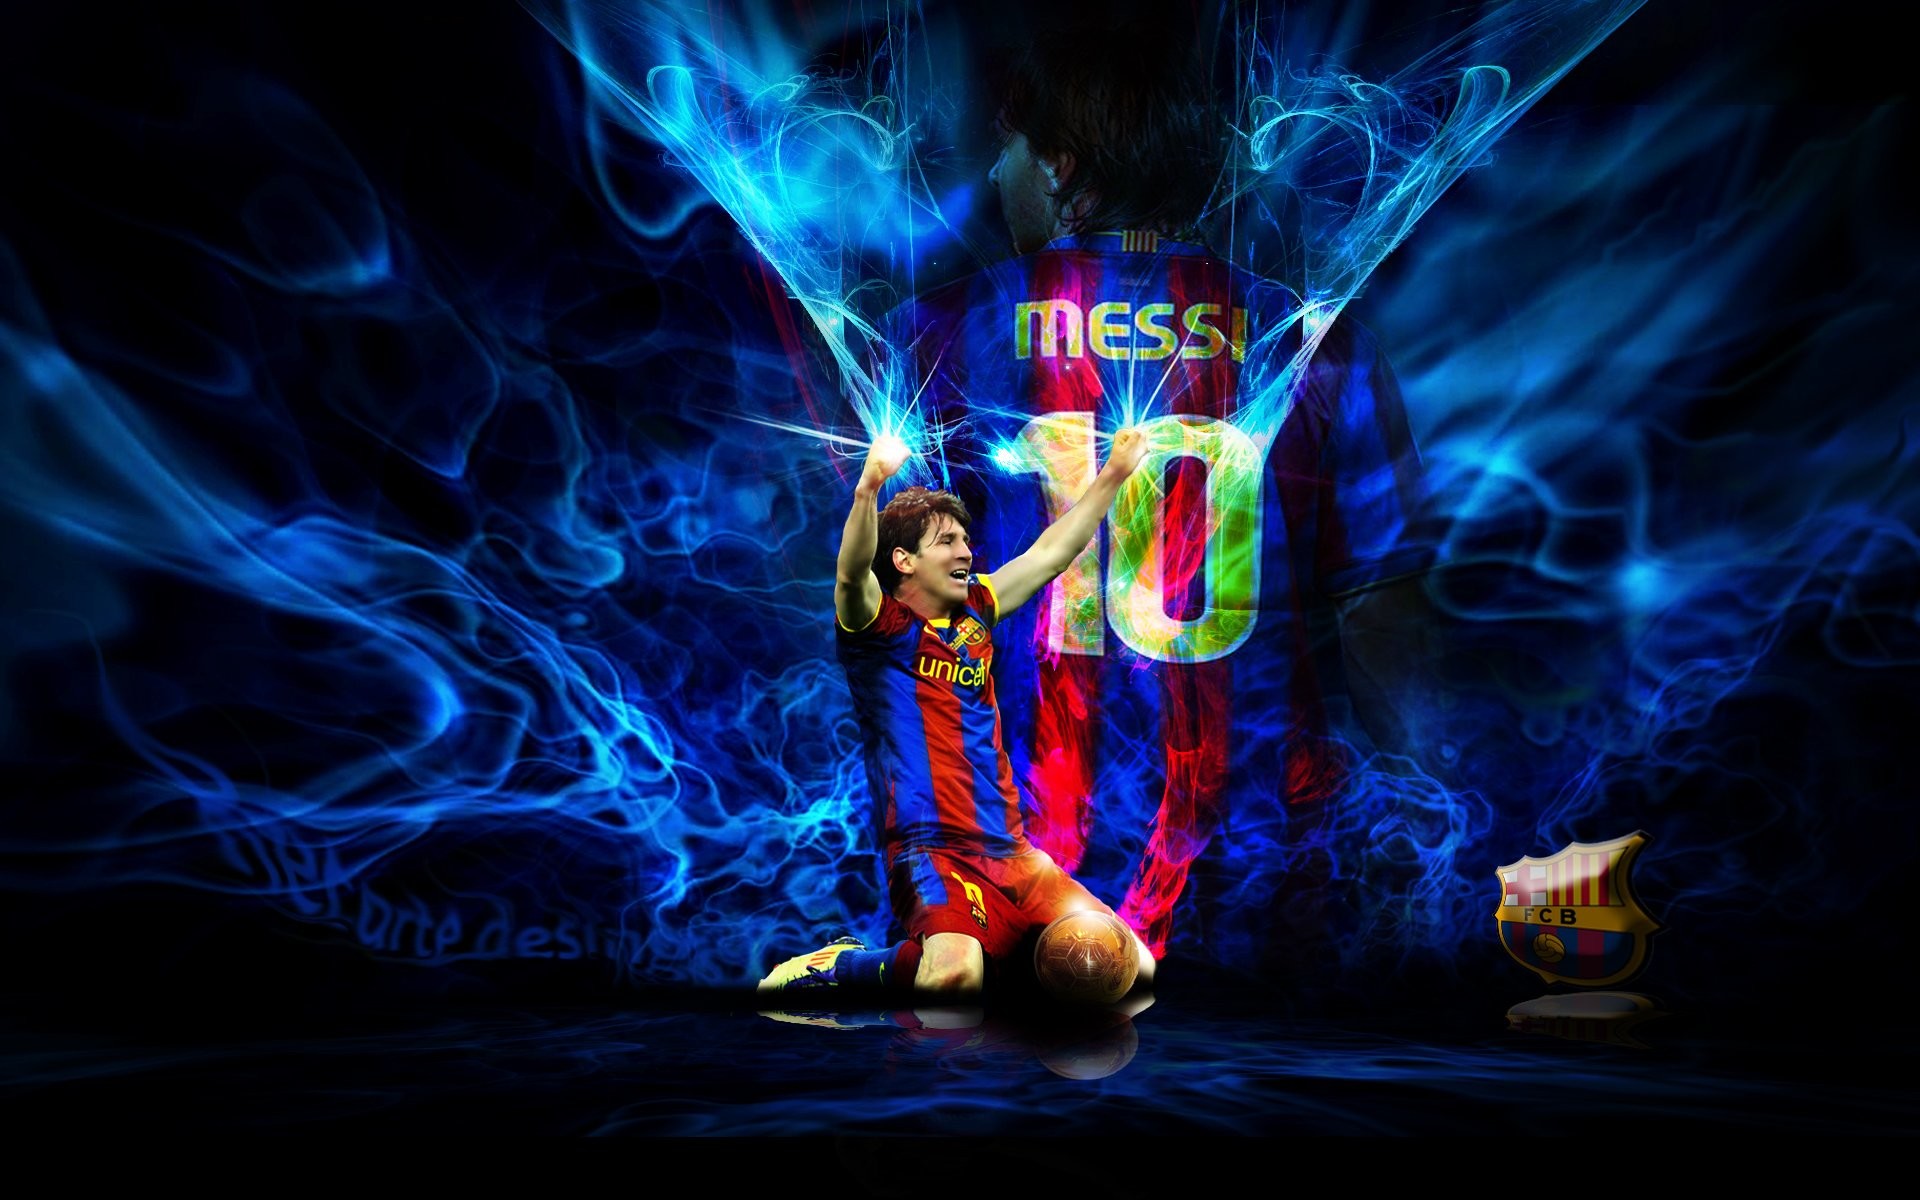 1920x1200 messi 2014 wallpaper | Photography | Pinterest | Messi, Lionel messi and  Football players